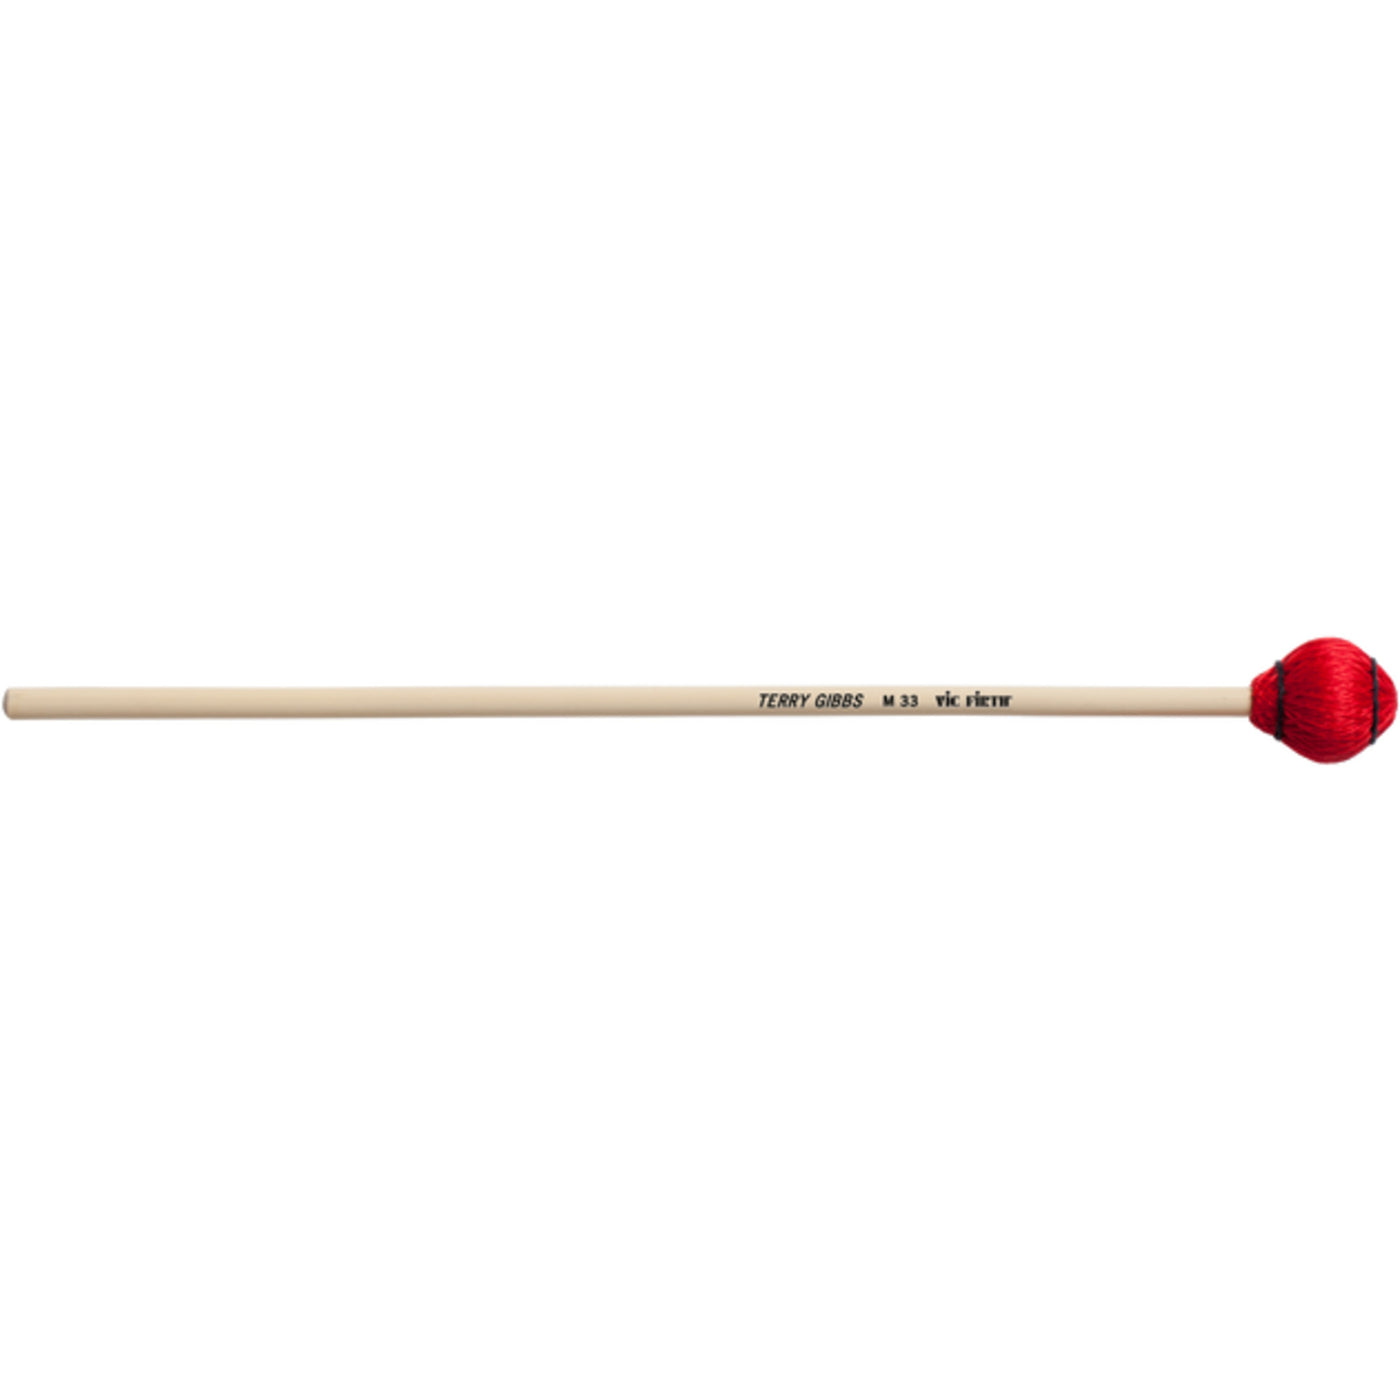 Vic Firth Terry Gibbs Keyboard - Hard – Red Cord Mallets (M33)